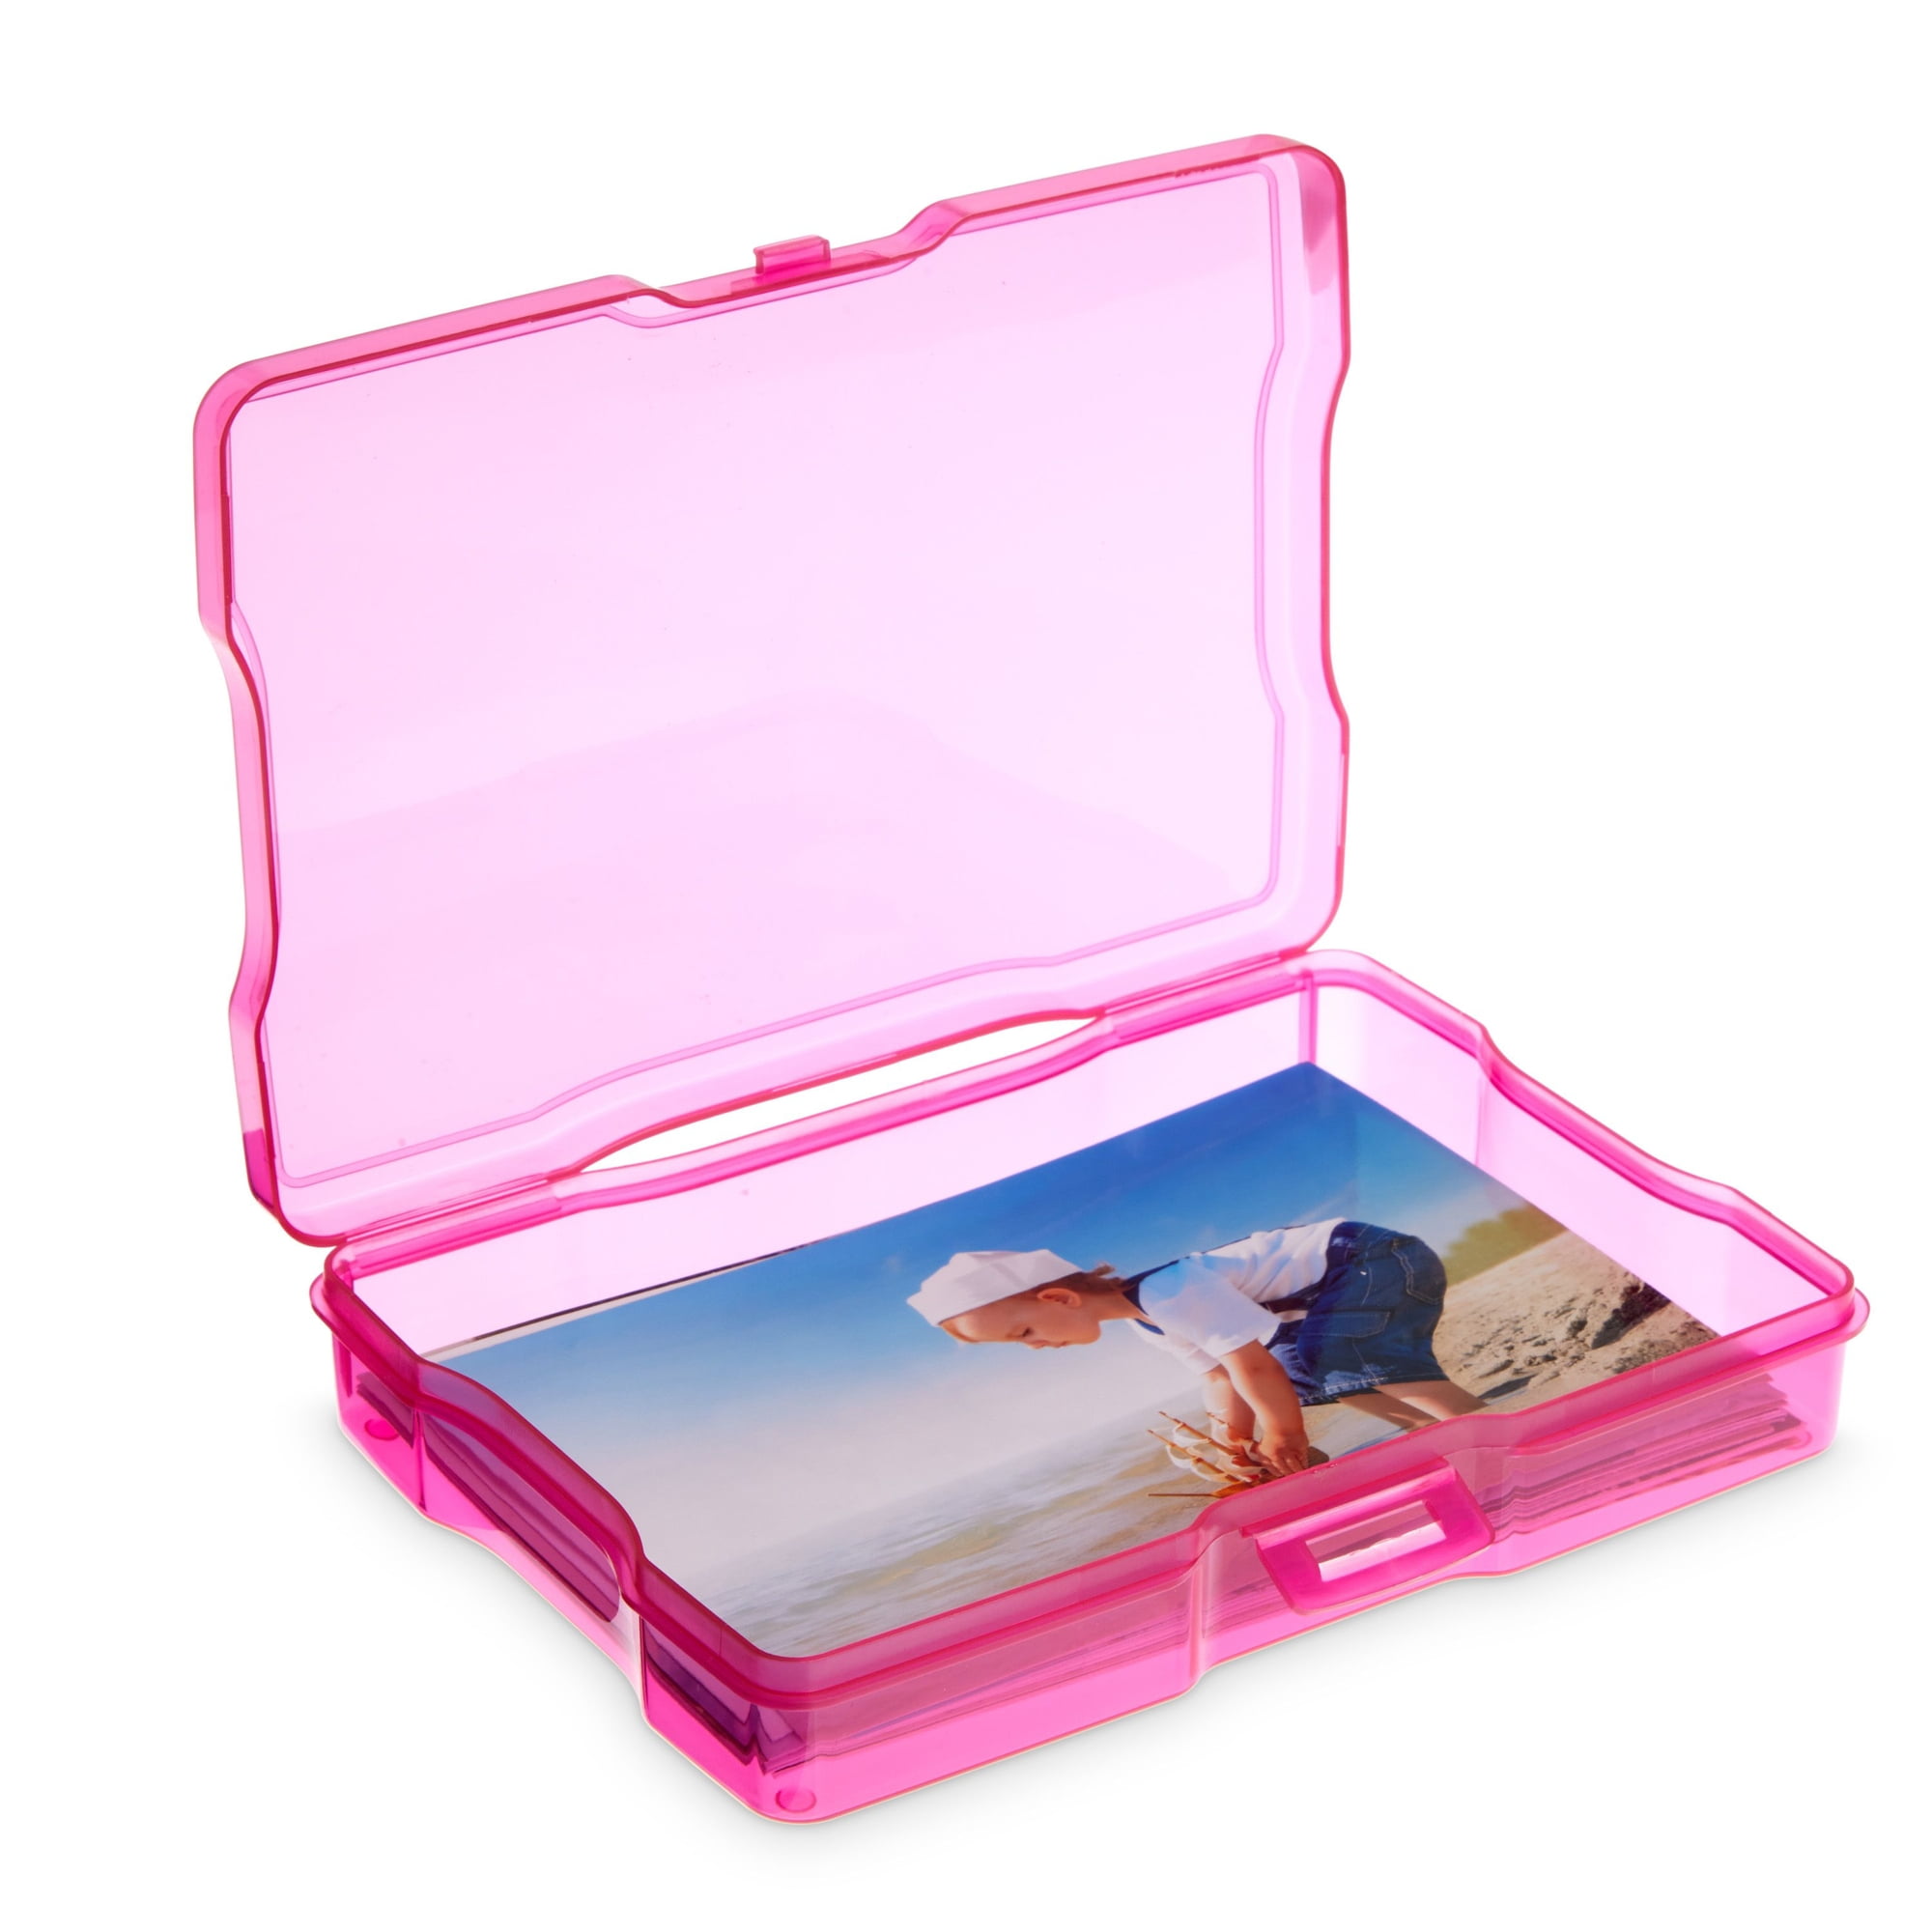 Jigitz 4x6 Photo Storage Box with Carrier - Clear Compartment